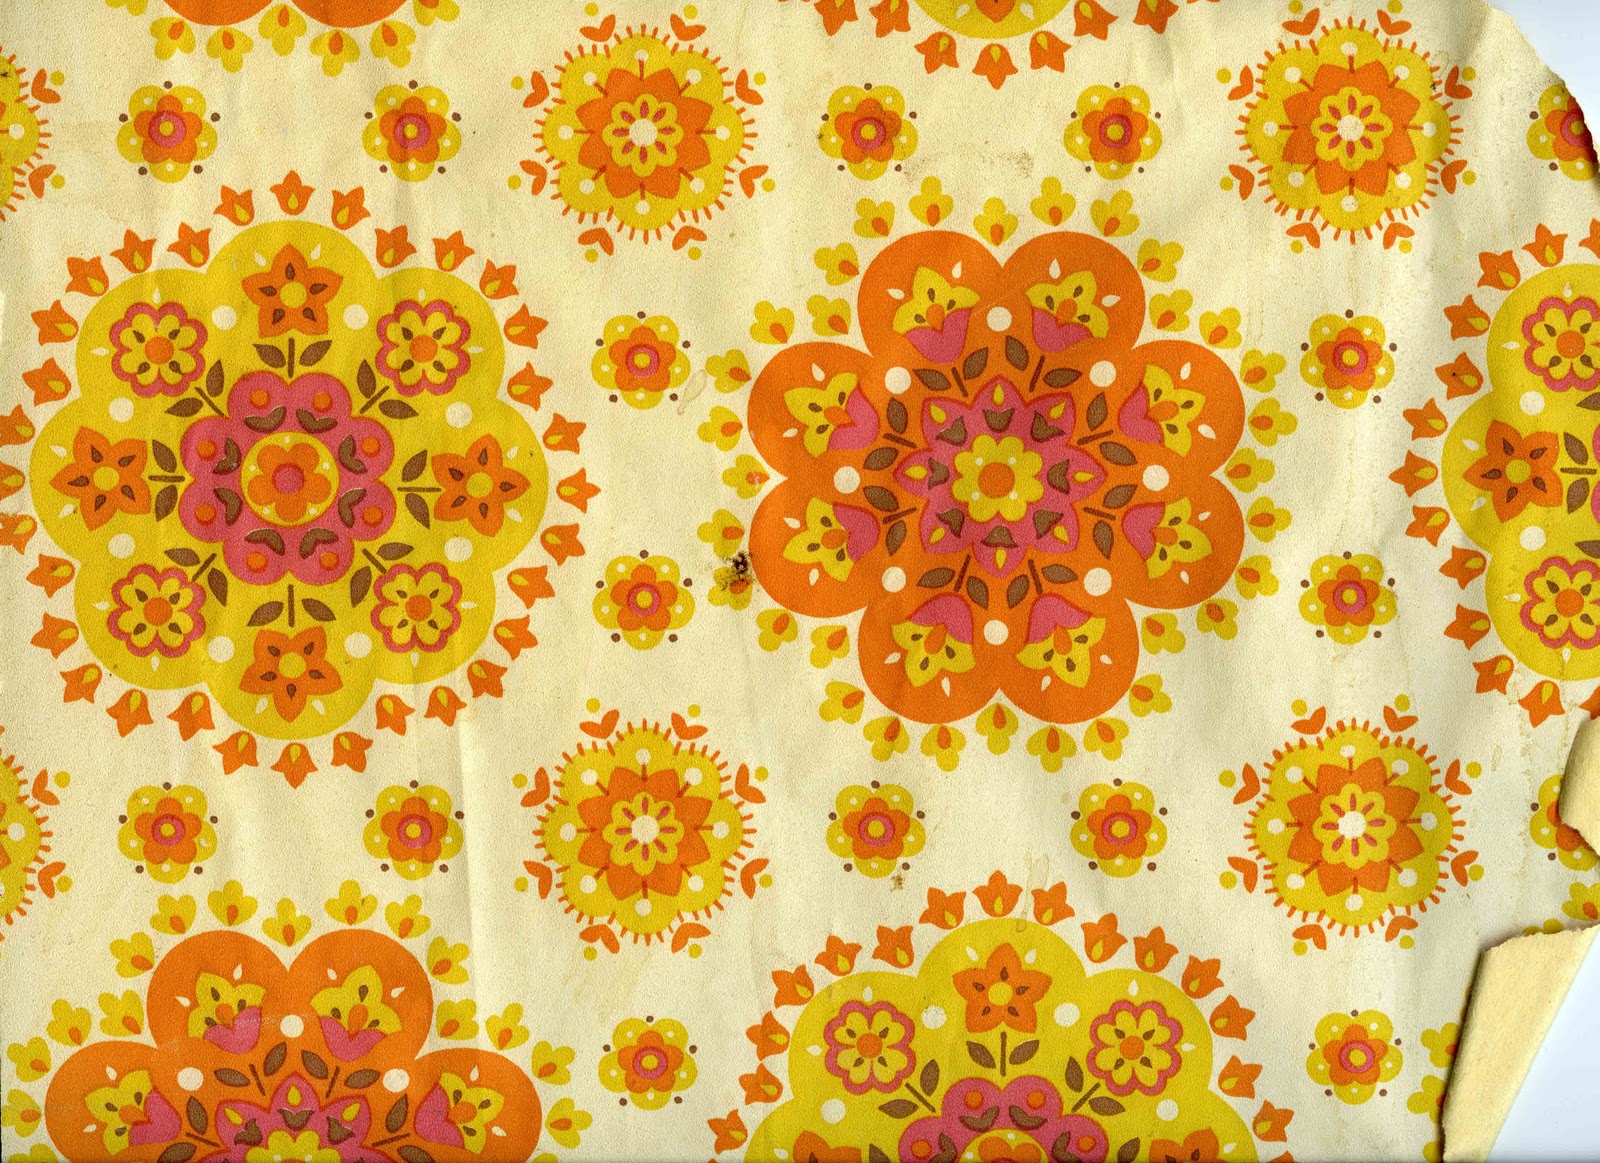 ... Blog: A good piece of 60's or 70's wallpaper can liven up any day